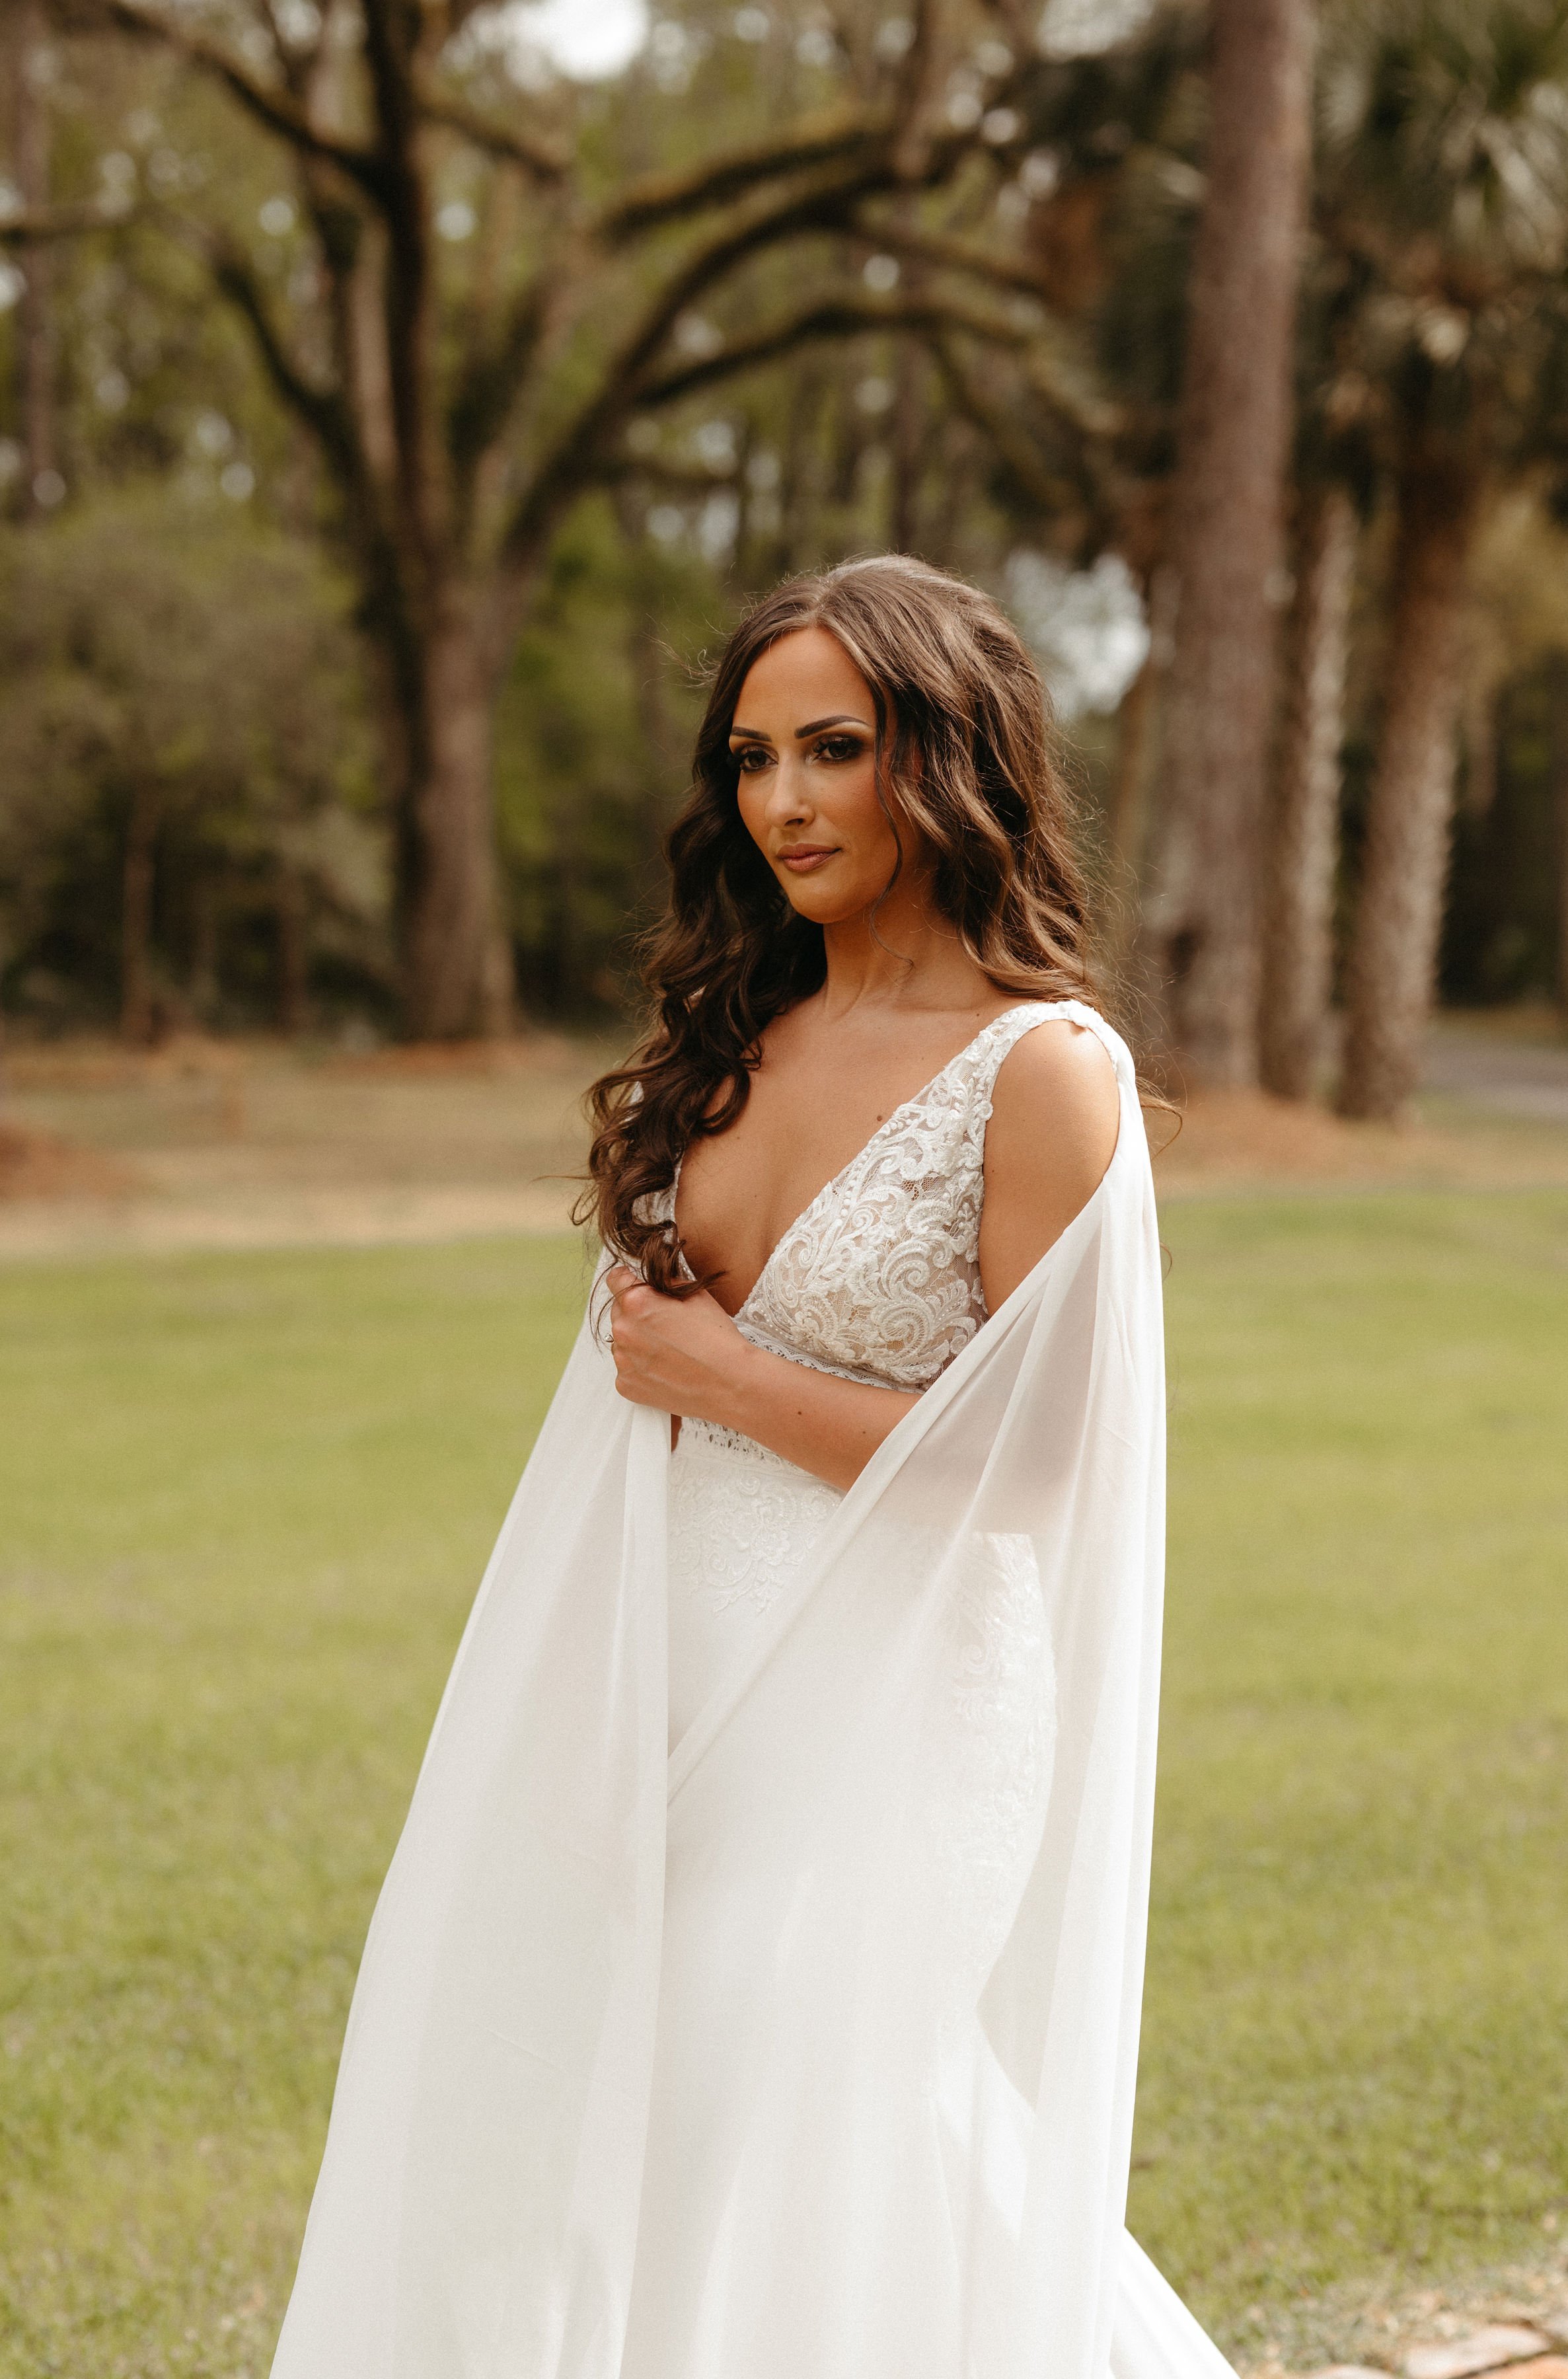 ivory-and-beau-blog-down-for-the-gown-lorren-real-bride-southern-bride-maggie-sottero-wedding-dress-made-with-love-bridal-wings-savannah-bridal-shop-savannah-bridal-boutique-savannah-georgia-The_Buie_Barn_Hall_Wedding_March_2022-15.jpg